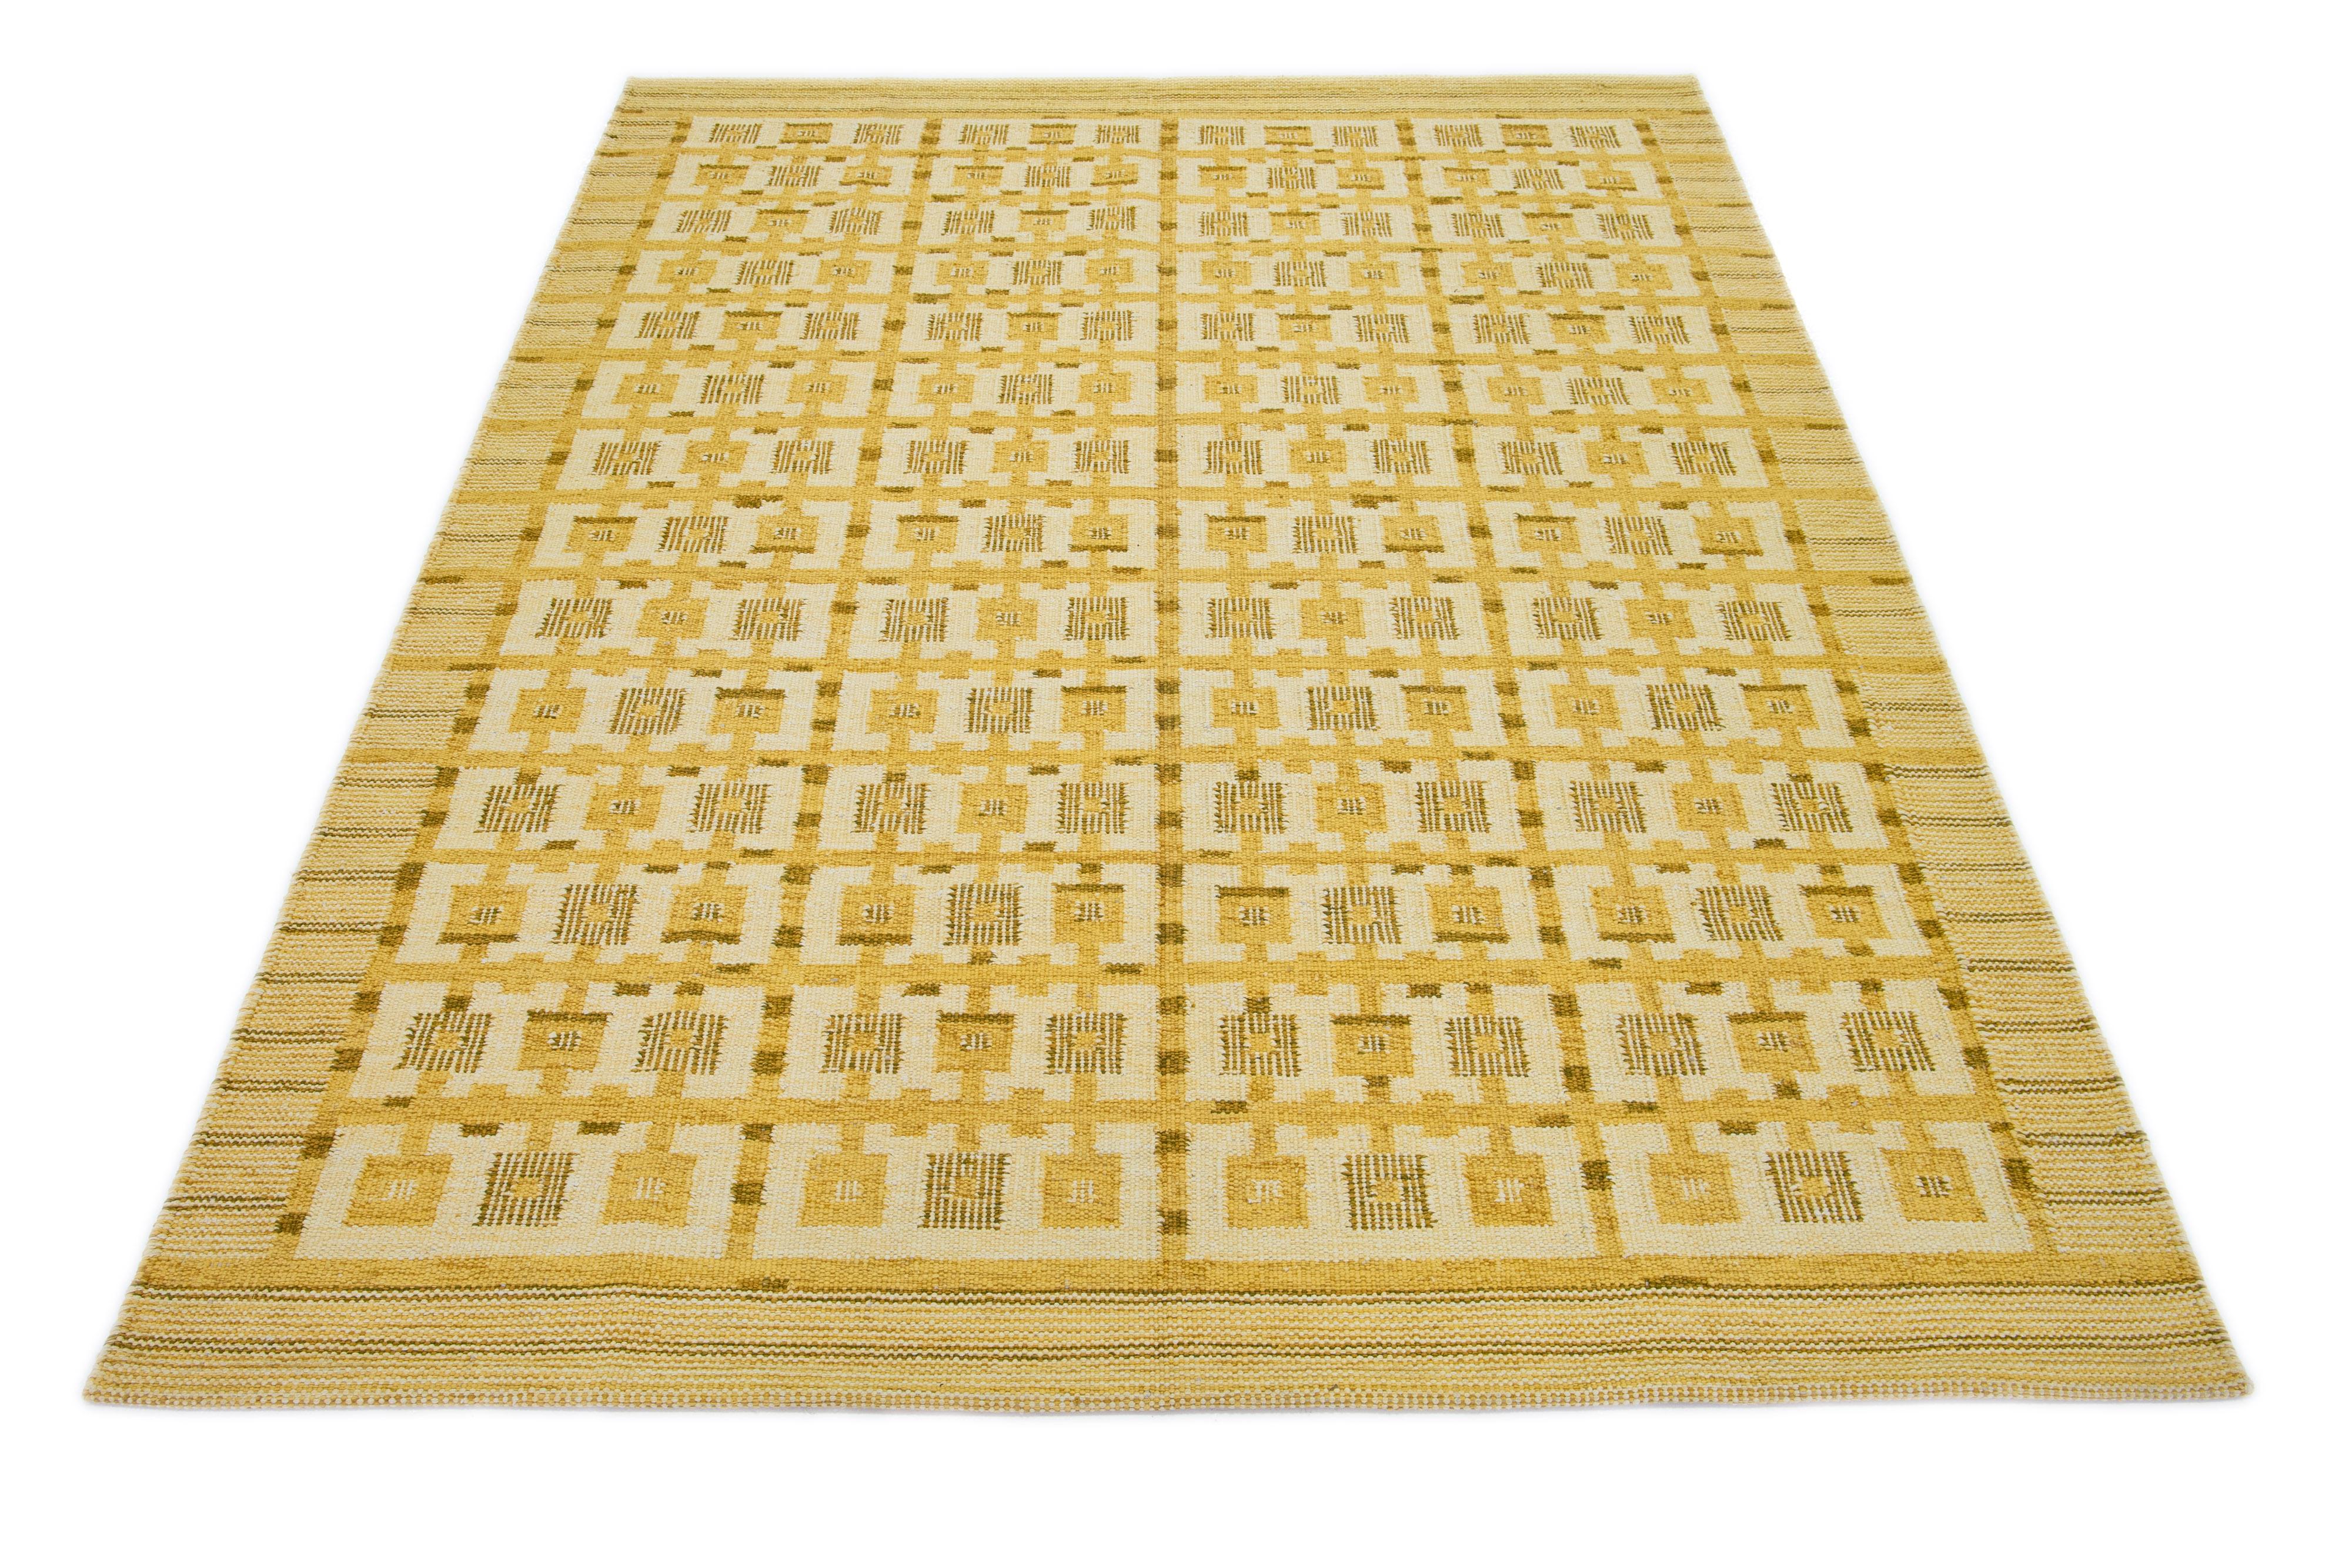 This flatweave rug features a chic, contemporary Swedish design with a yellow field color. It has a geometric pattern throughout the rug in beige shades.

 This rug measures 7'11